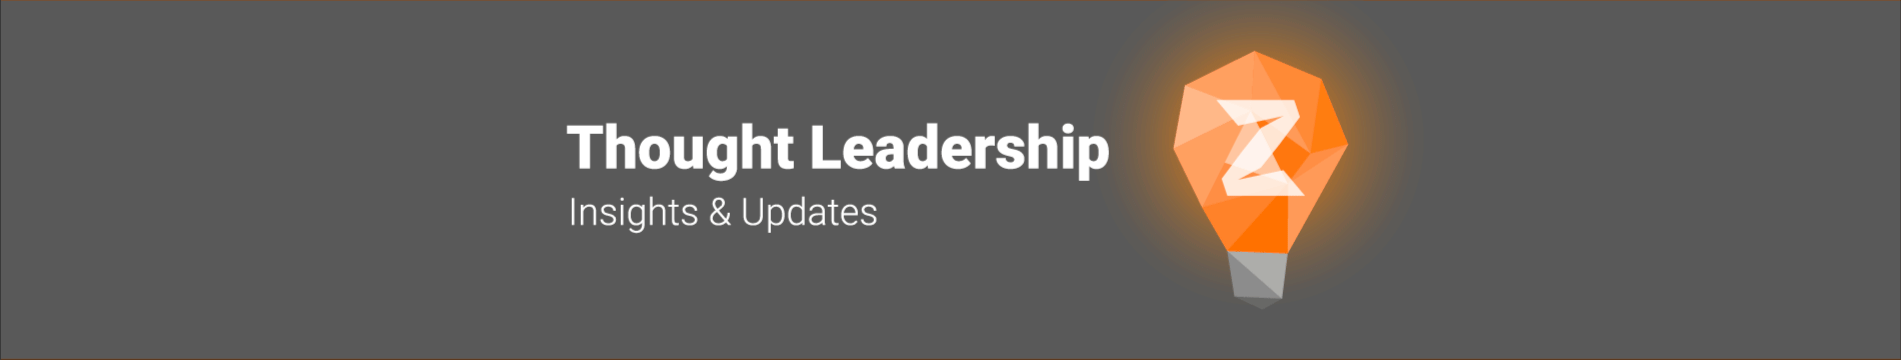 thought leadership insights and updates